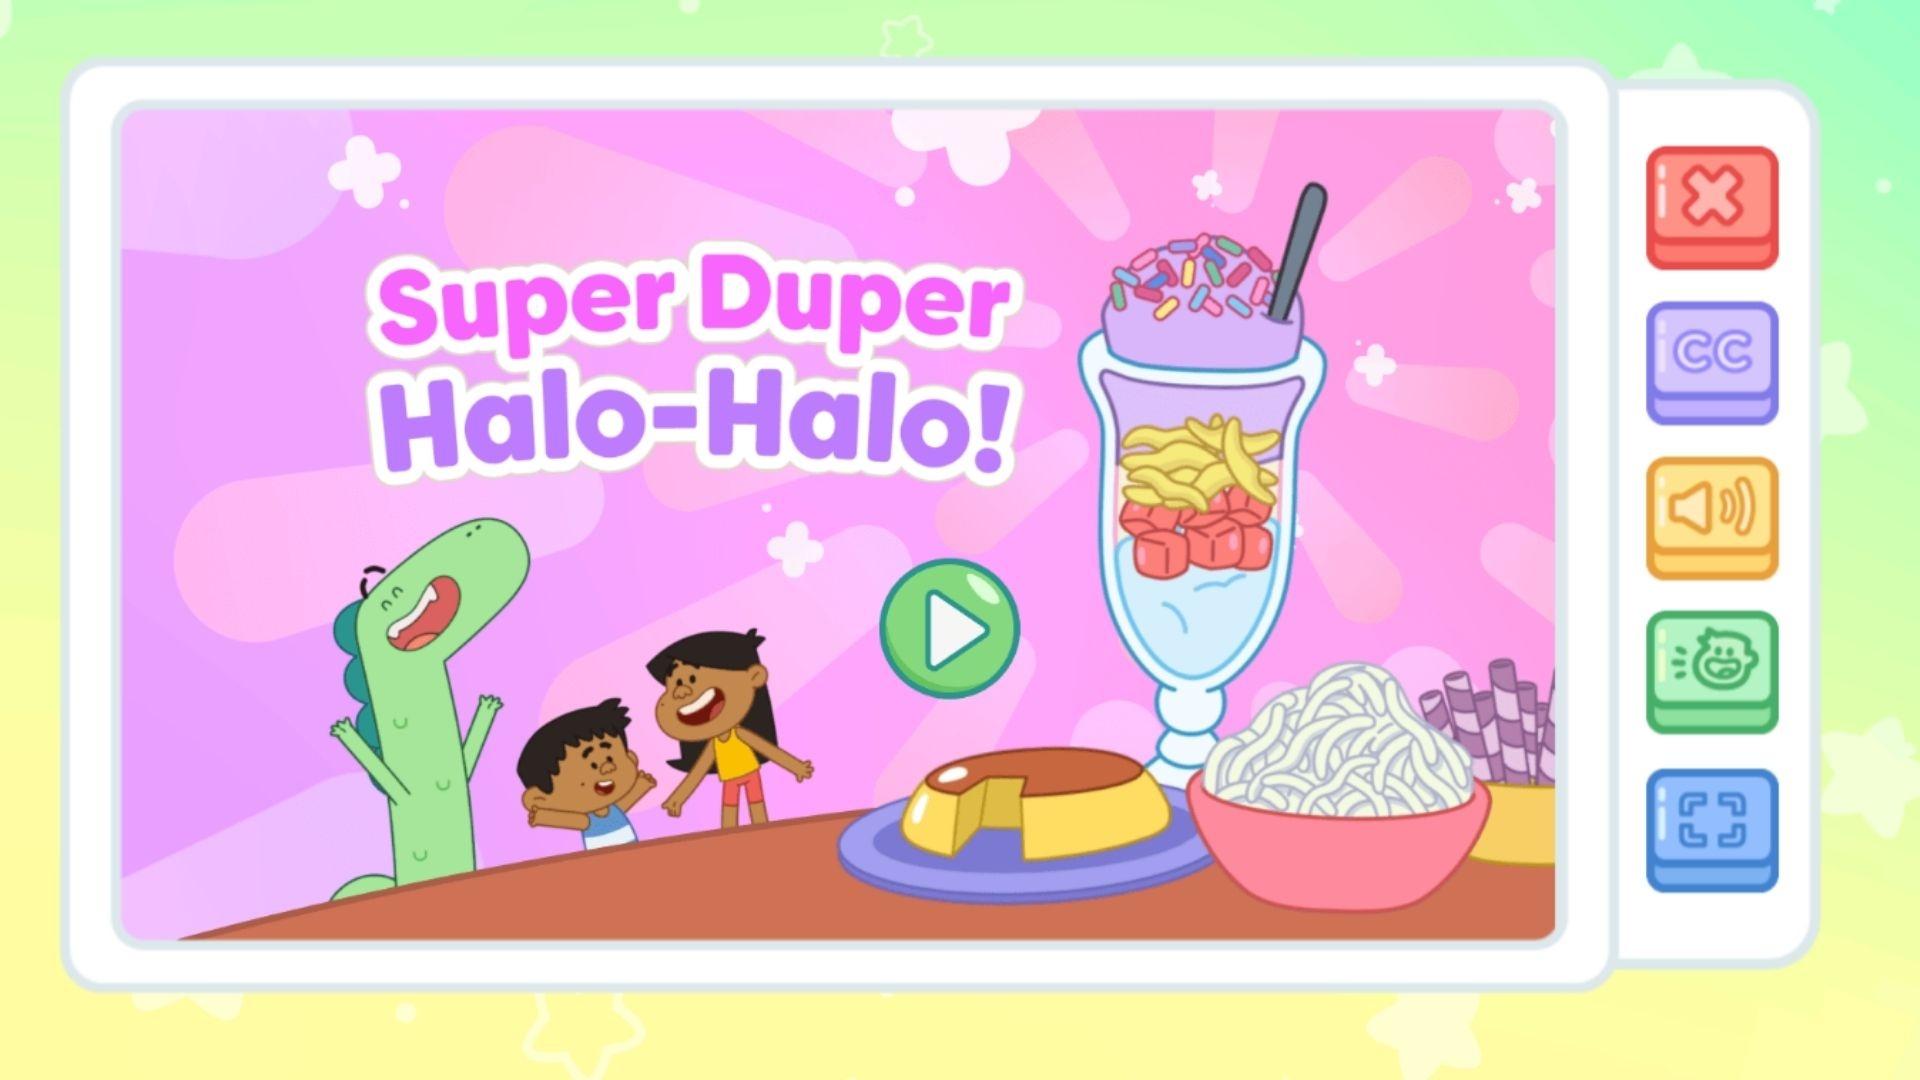 The start screen for the PBS KIDS game Super Duper Halo-Halo.